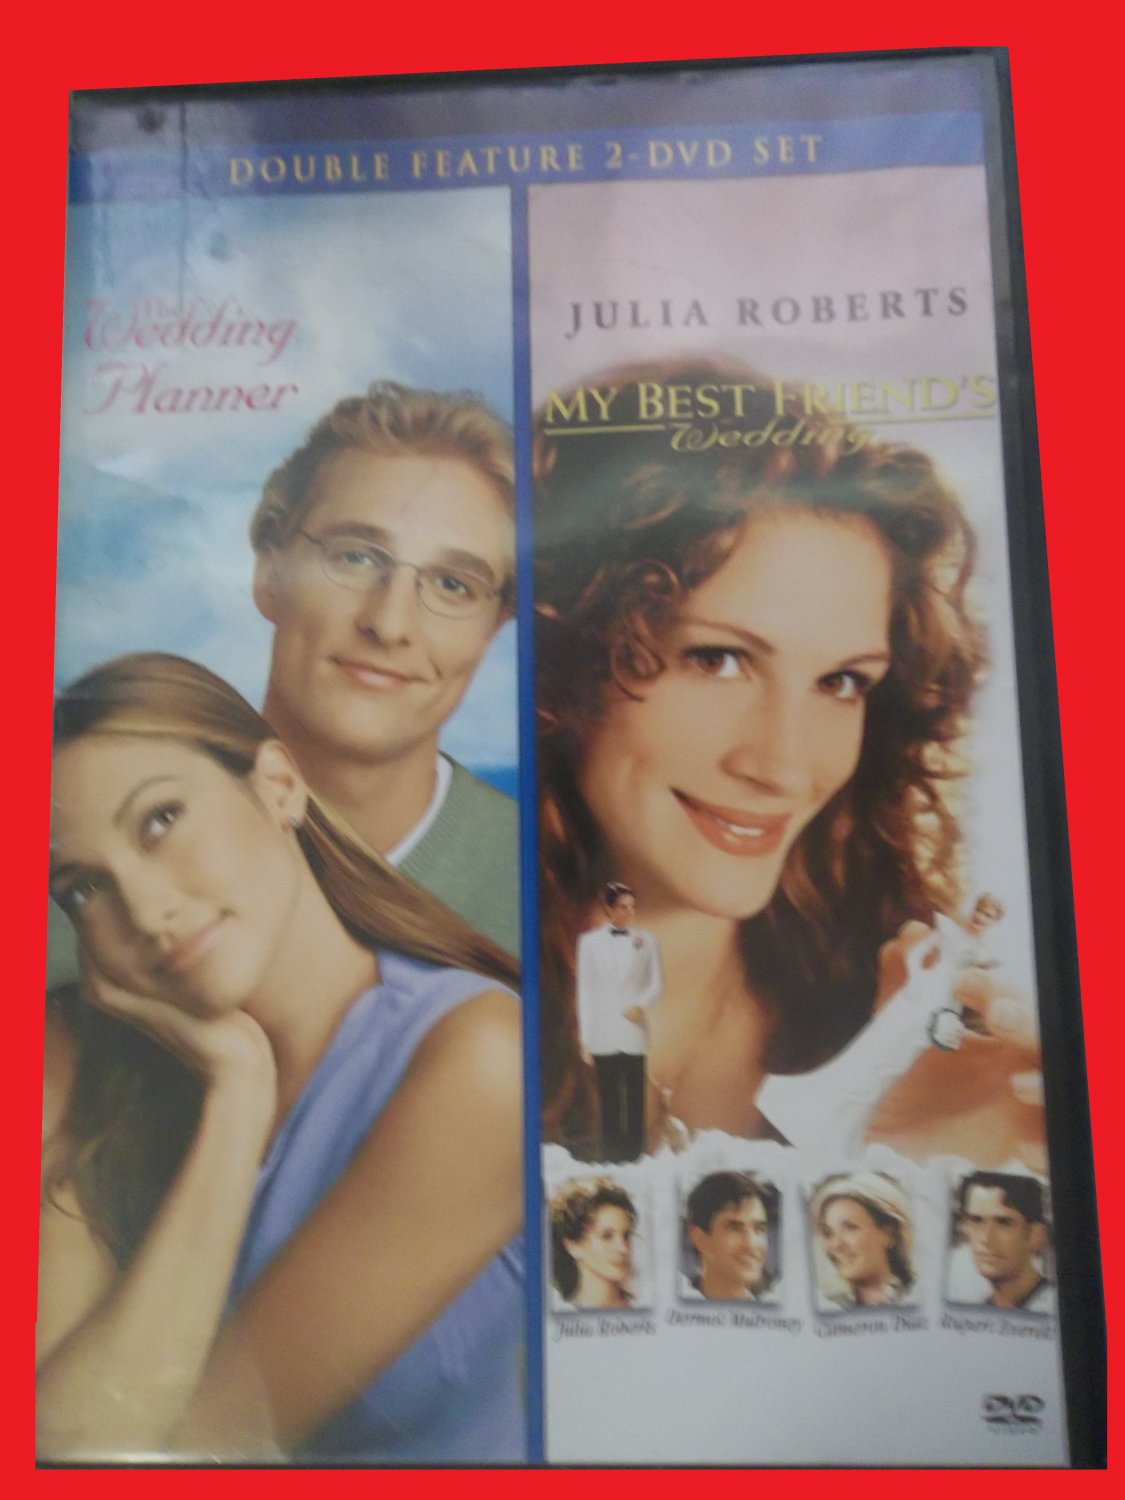 DOUBLE FEATURE THE WEDDING PLANNER & MY BEST FRIENDS WEDDING (FREE DVD